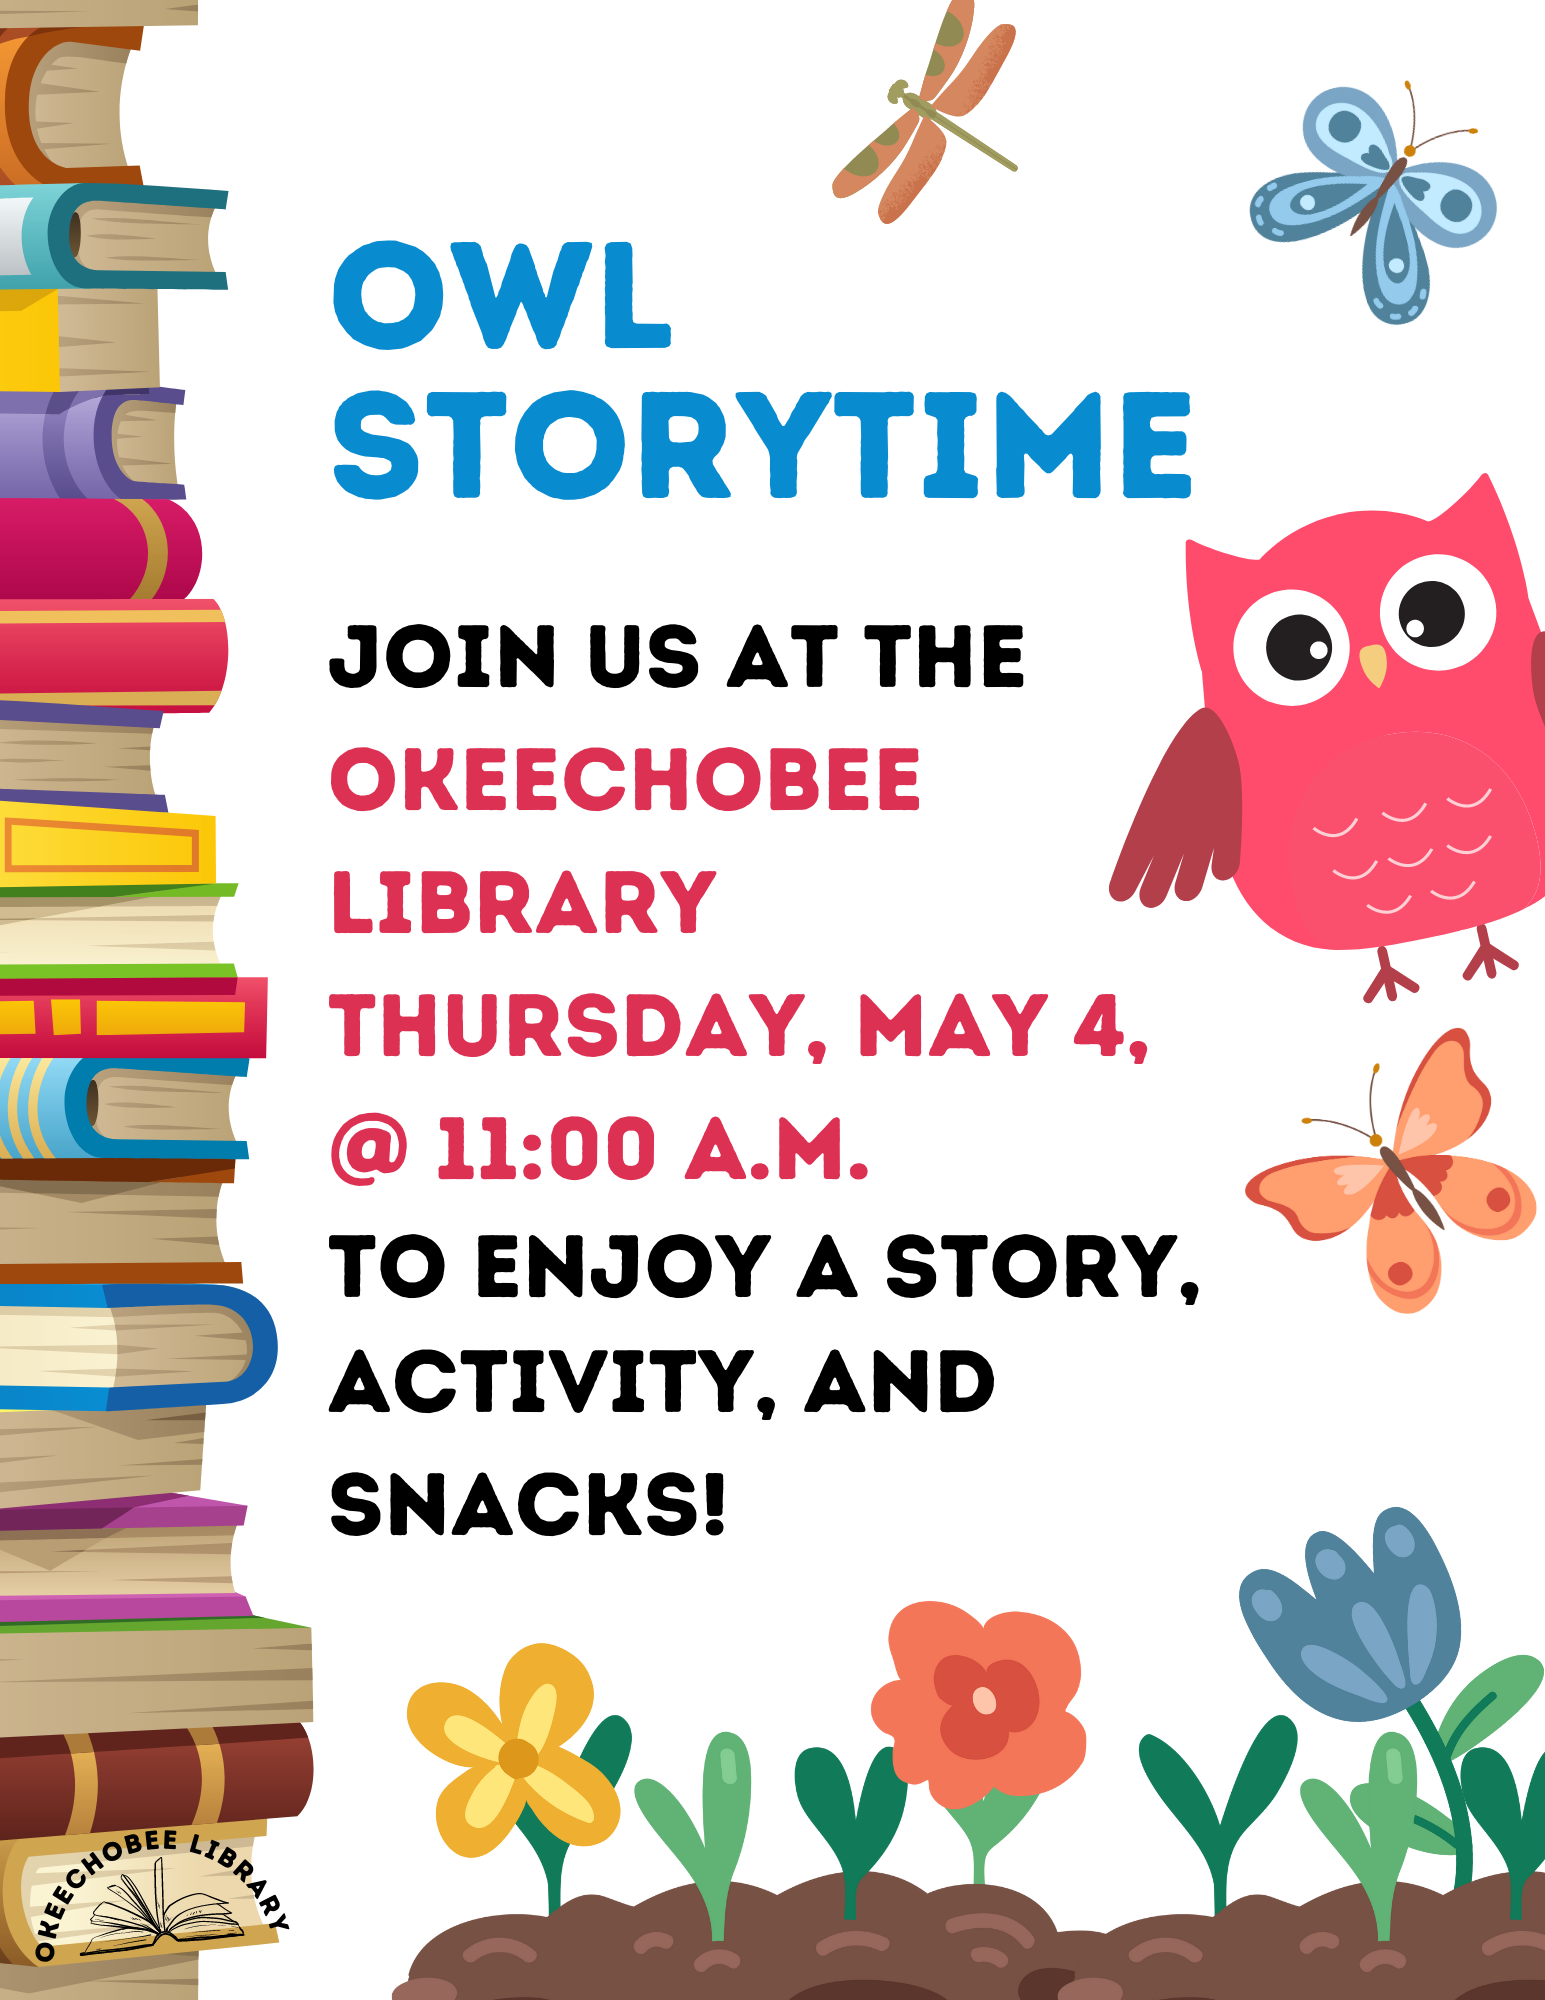 Join us at the Okeechobee Library on May 4th at 11:00 A.M. for our Owl Story Time! Come enjoy a story, a simple acitvity, and fun snacks!